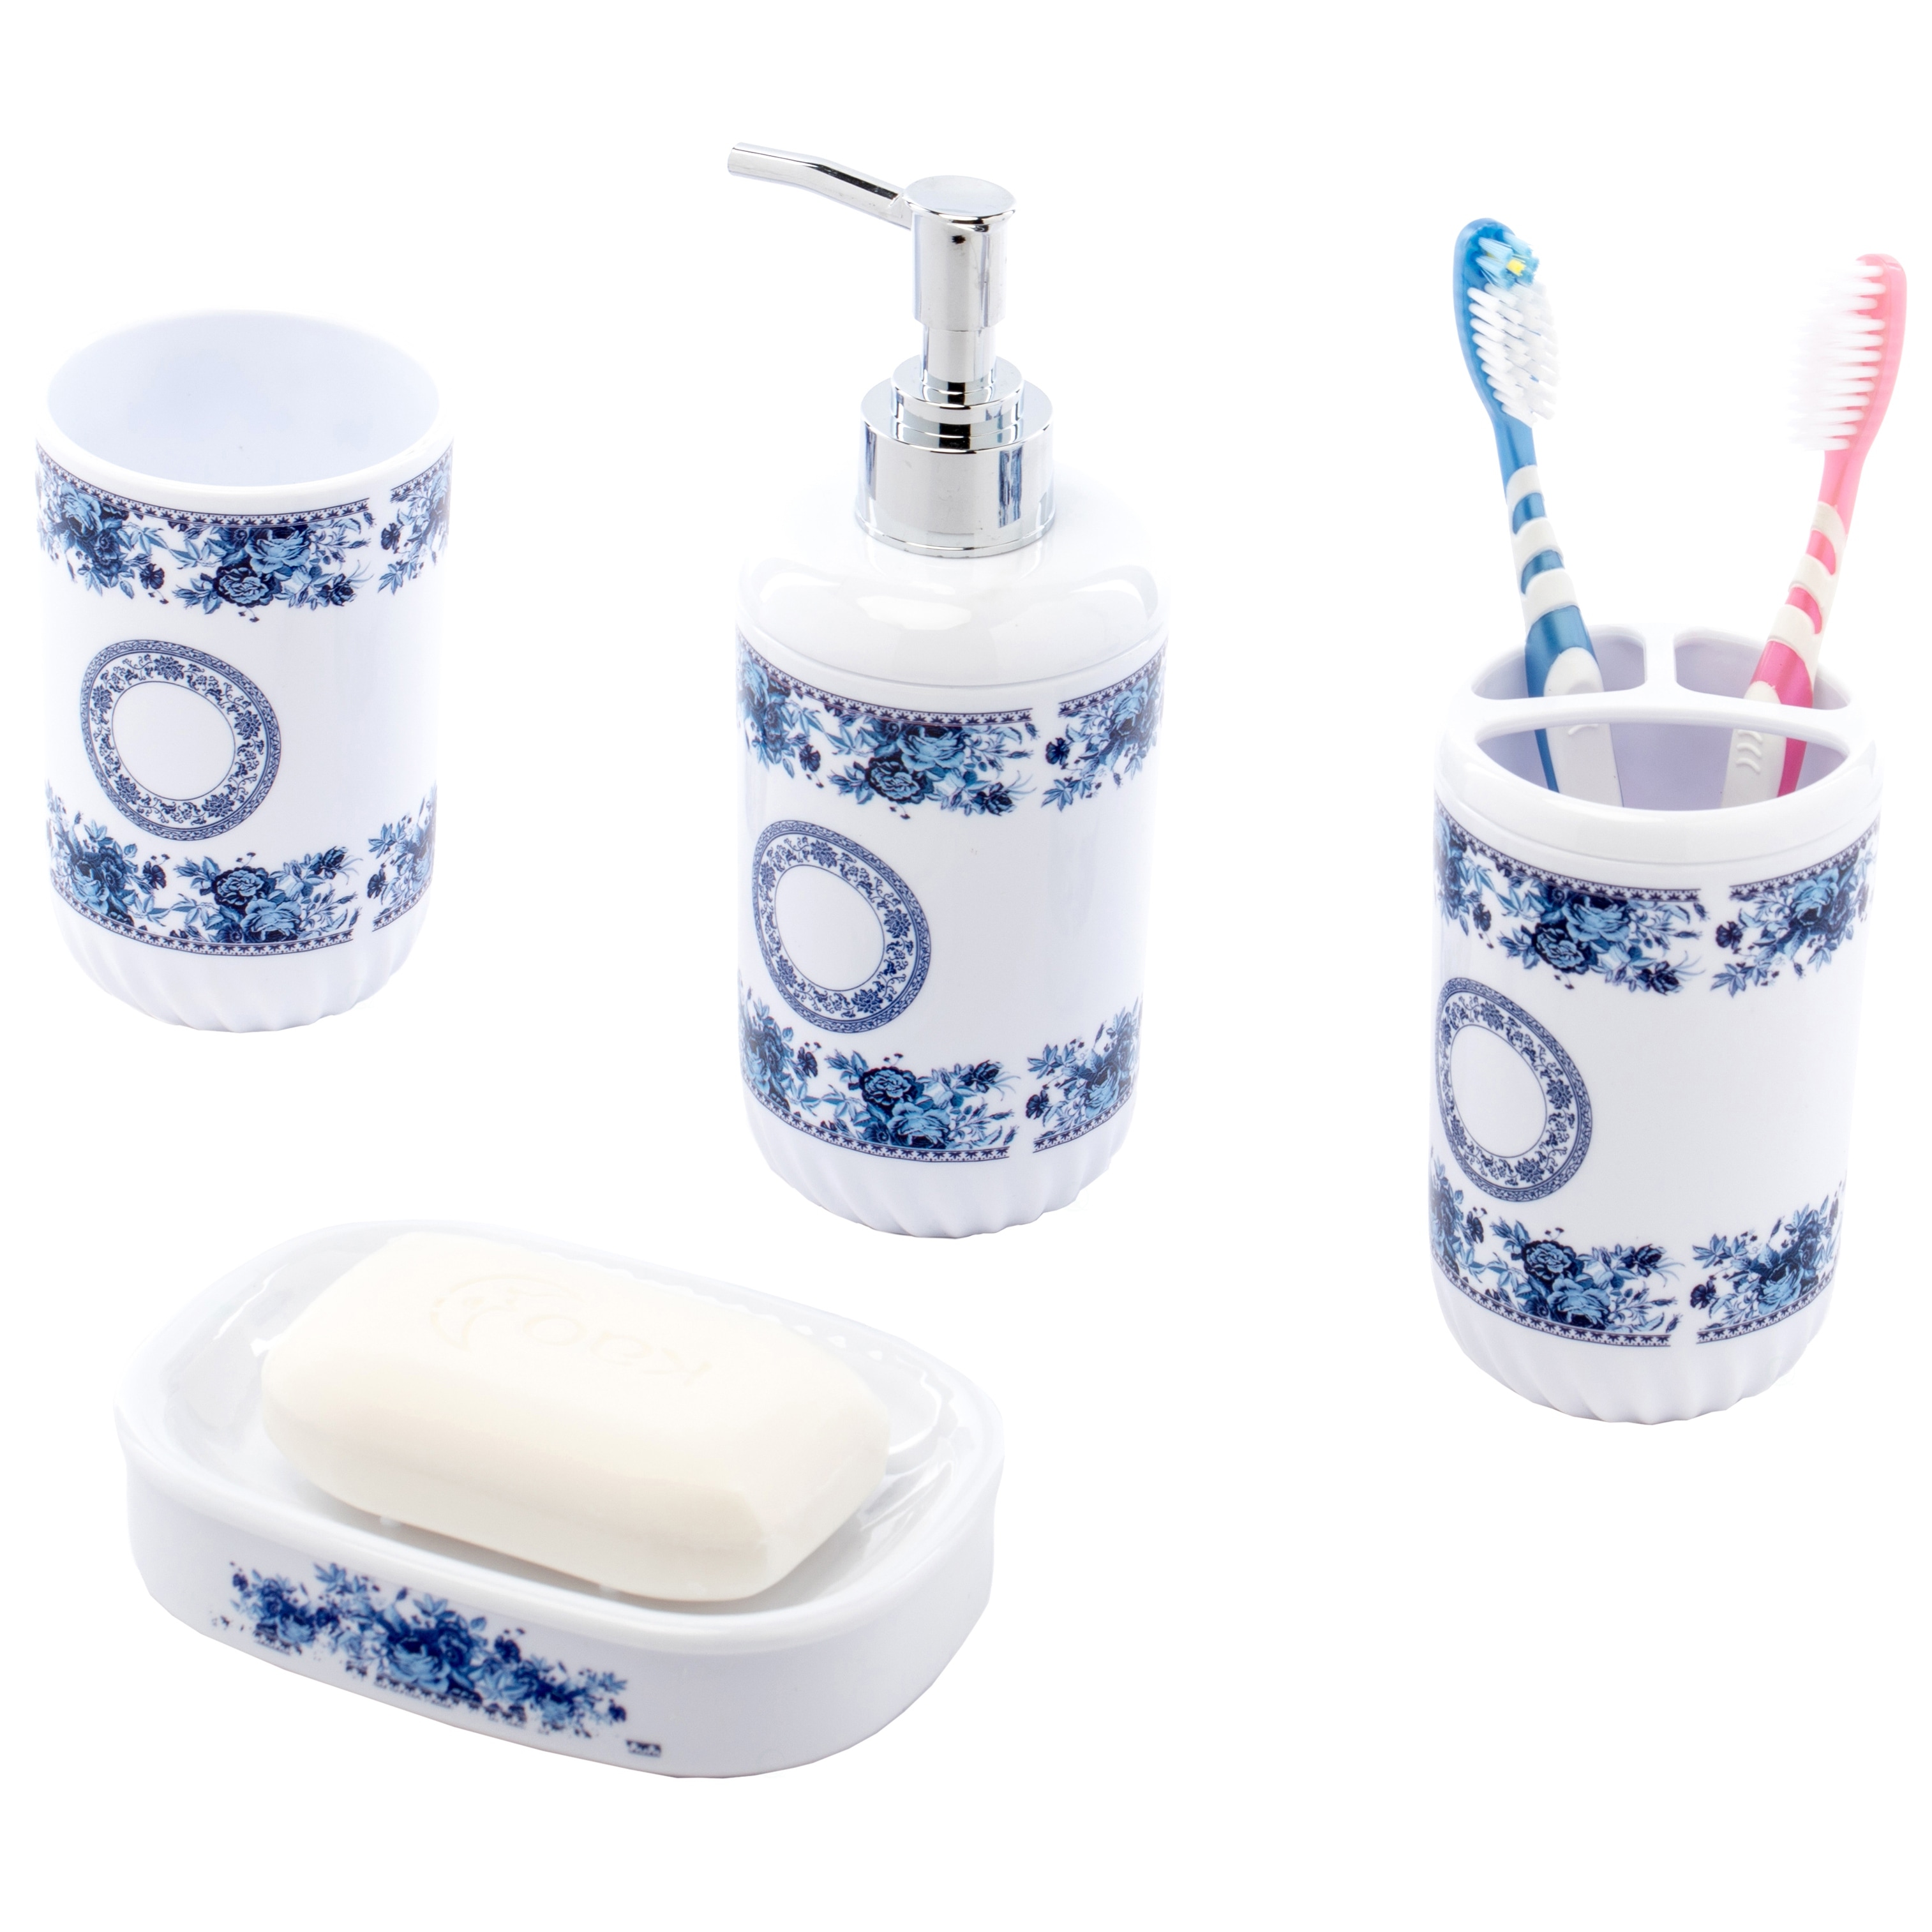 4Pcs/Set Bathroom Suit Accessories Includes Cup Toothbrush Soap Dish YZ 